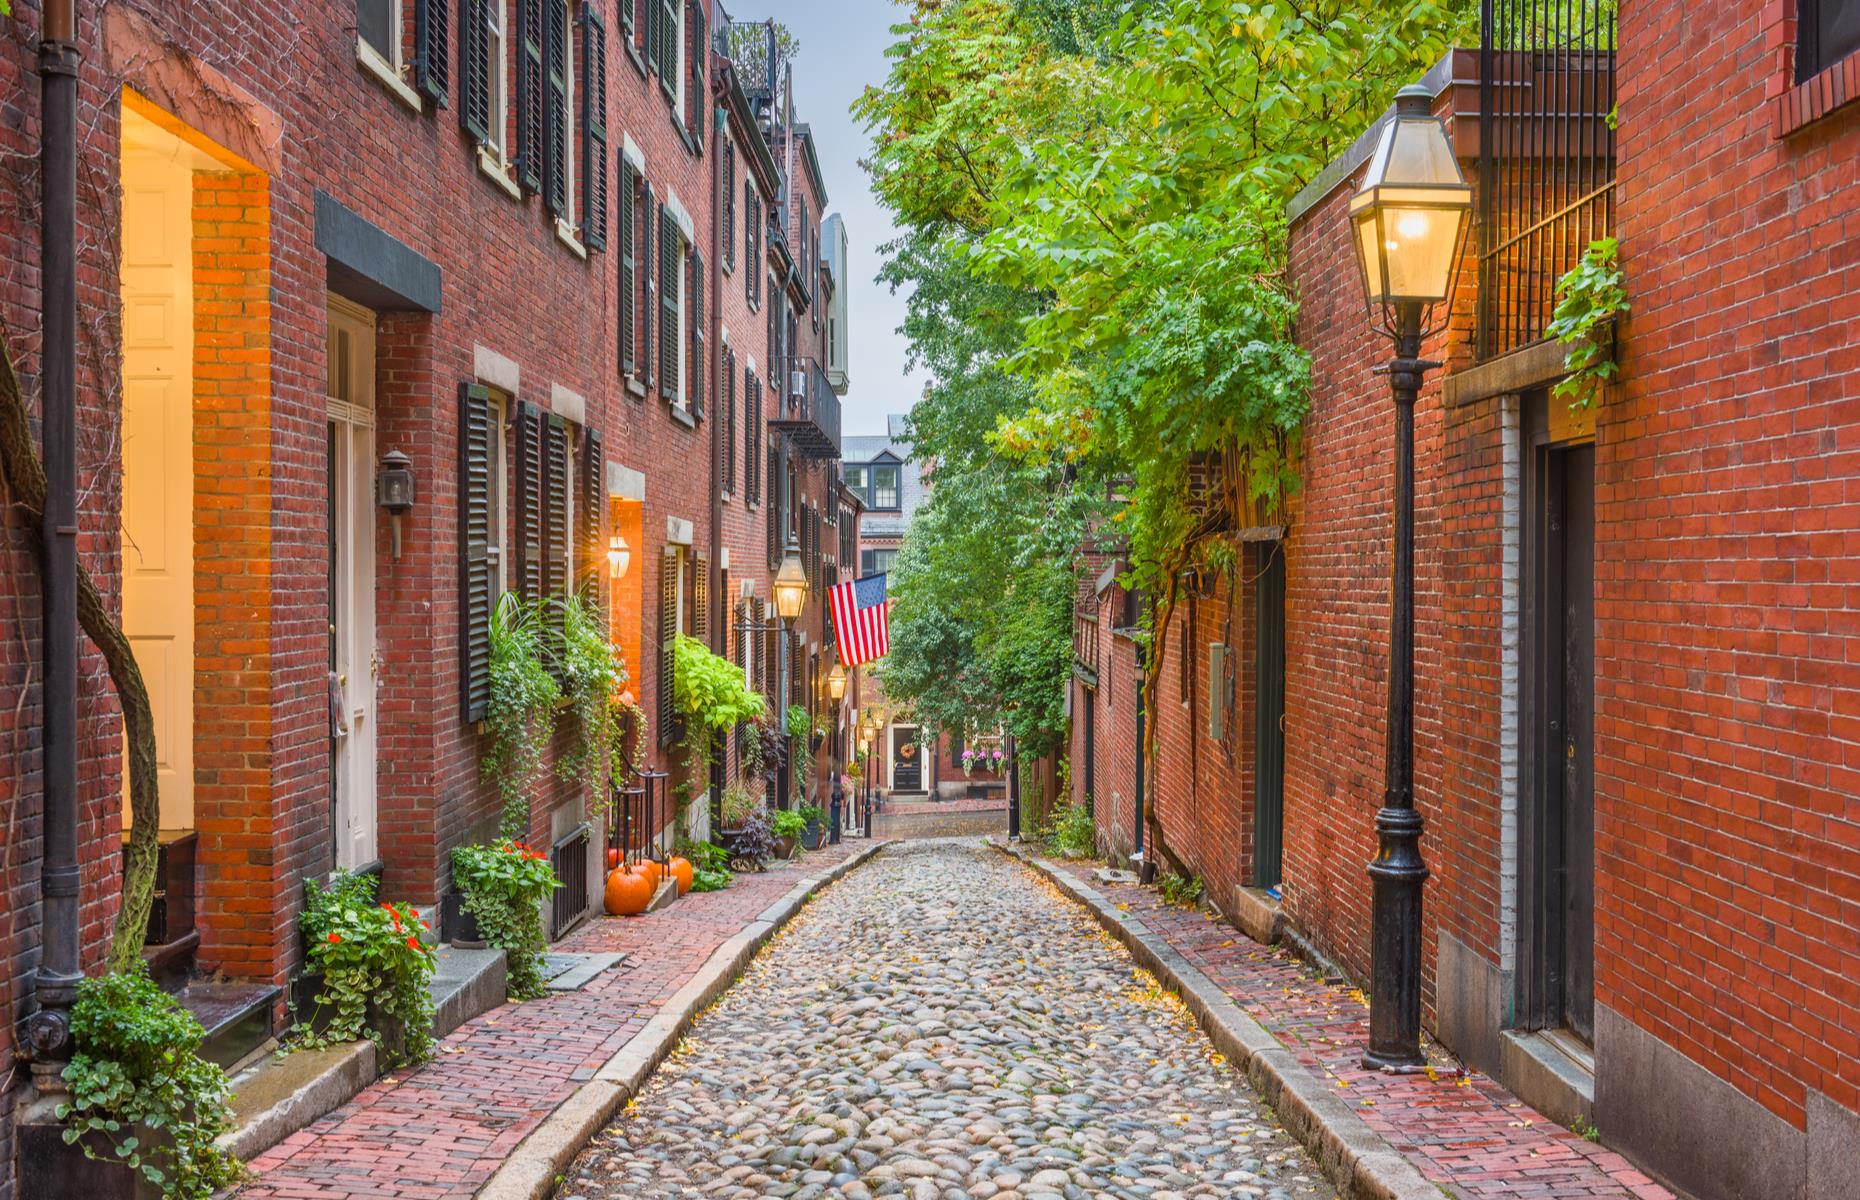 Slide 59 of 100: Acorn Street, in Boston's charming Beacon Hill neighborhood, is often tipped as the most photographed street in the country – and it's not hard to see why. The snug cobblestoned lane is lined with gas lamps and red-brick row-houses draped with the American flag, their window boxes spilling with greenery. It swelled with tradespeople and makers in the 1800s and today the homes are worth millions of dollars.